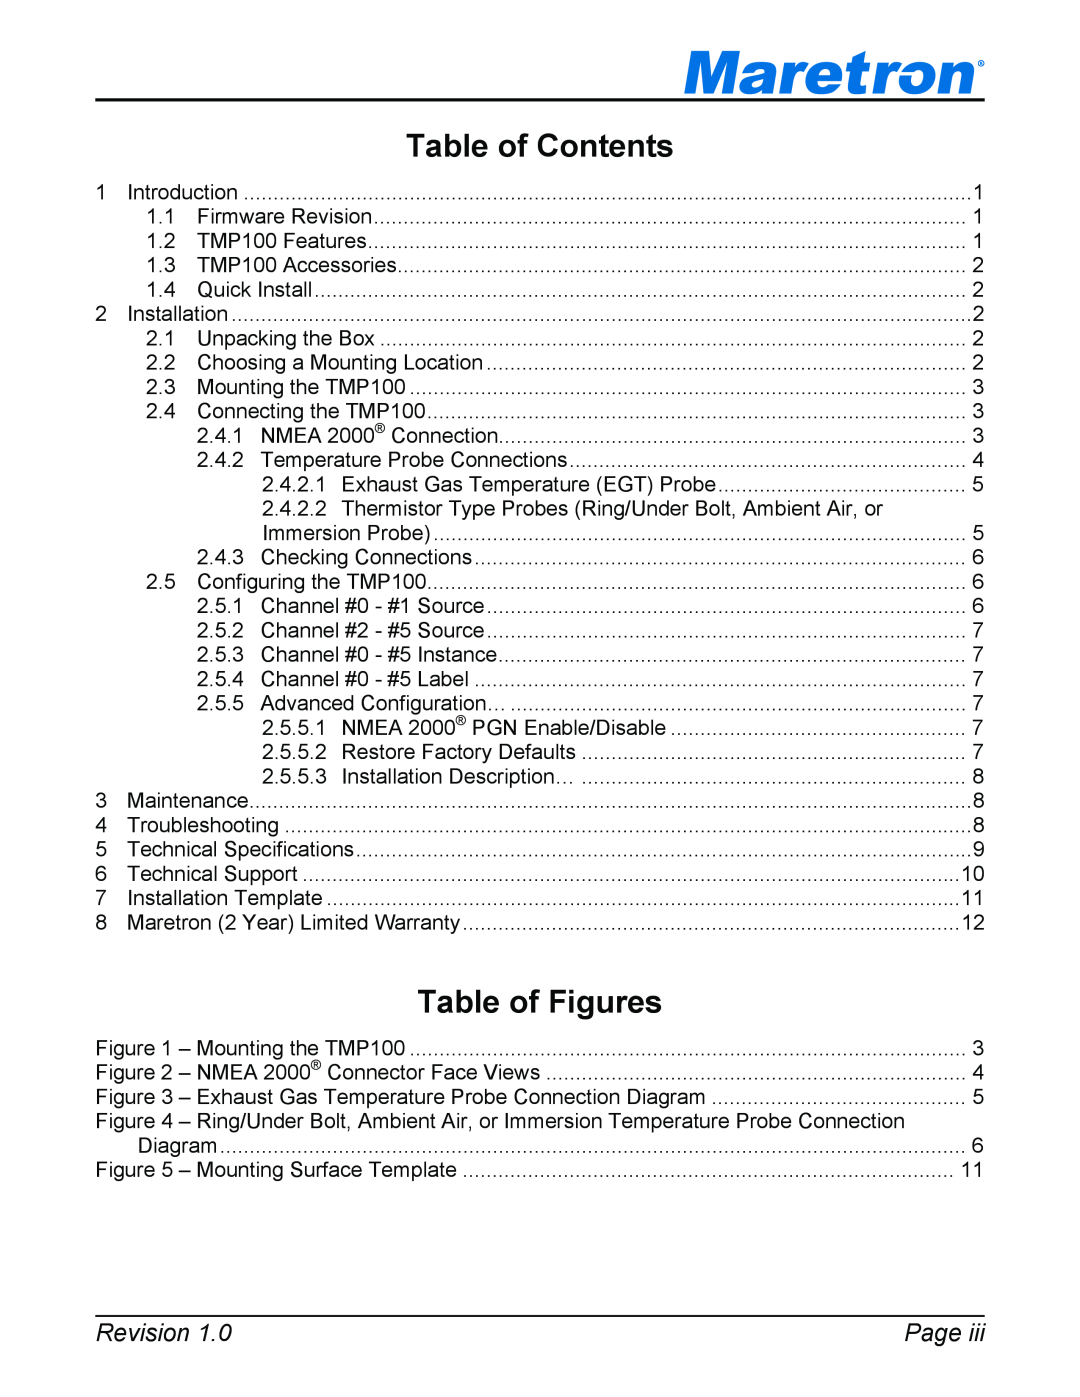 Maretron TP-EGT-1 user manual Table of Contents, Table of Figures, Revision, Page 